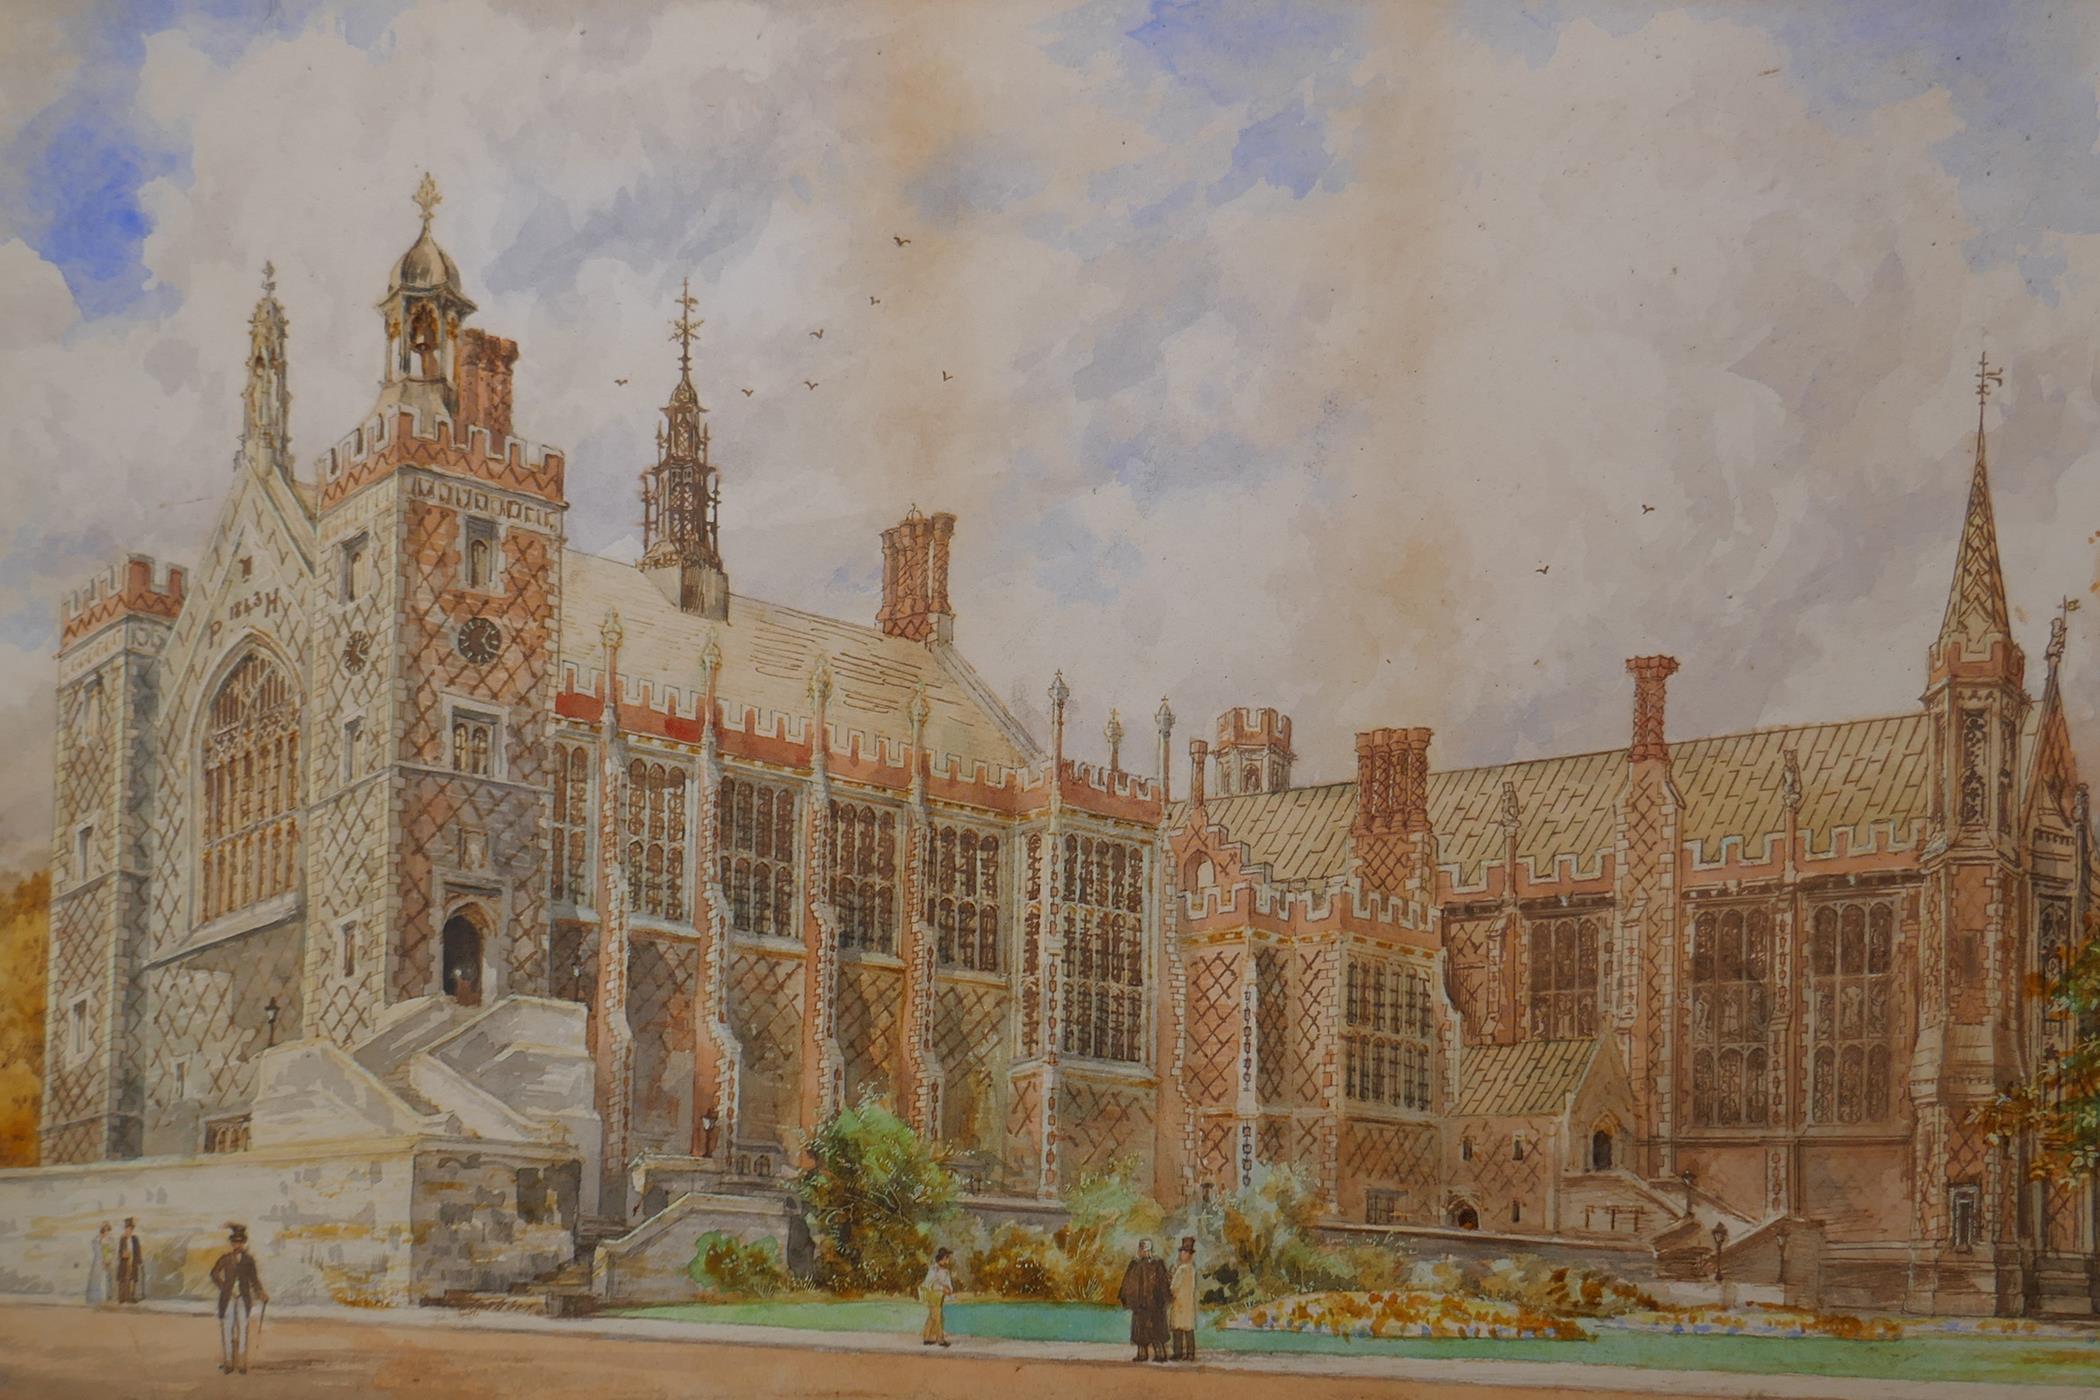 T. Cowlishaw, Lincoln's Inn (18)96, watercolour, and another of Harrow school buildings and - Image 3 of 7